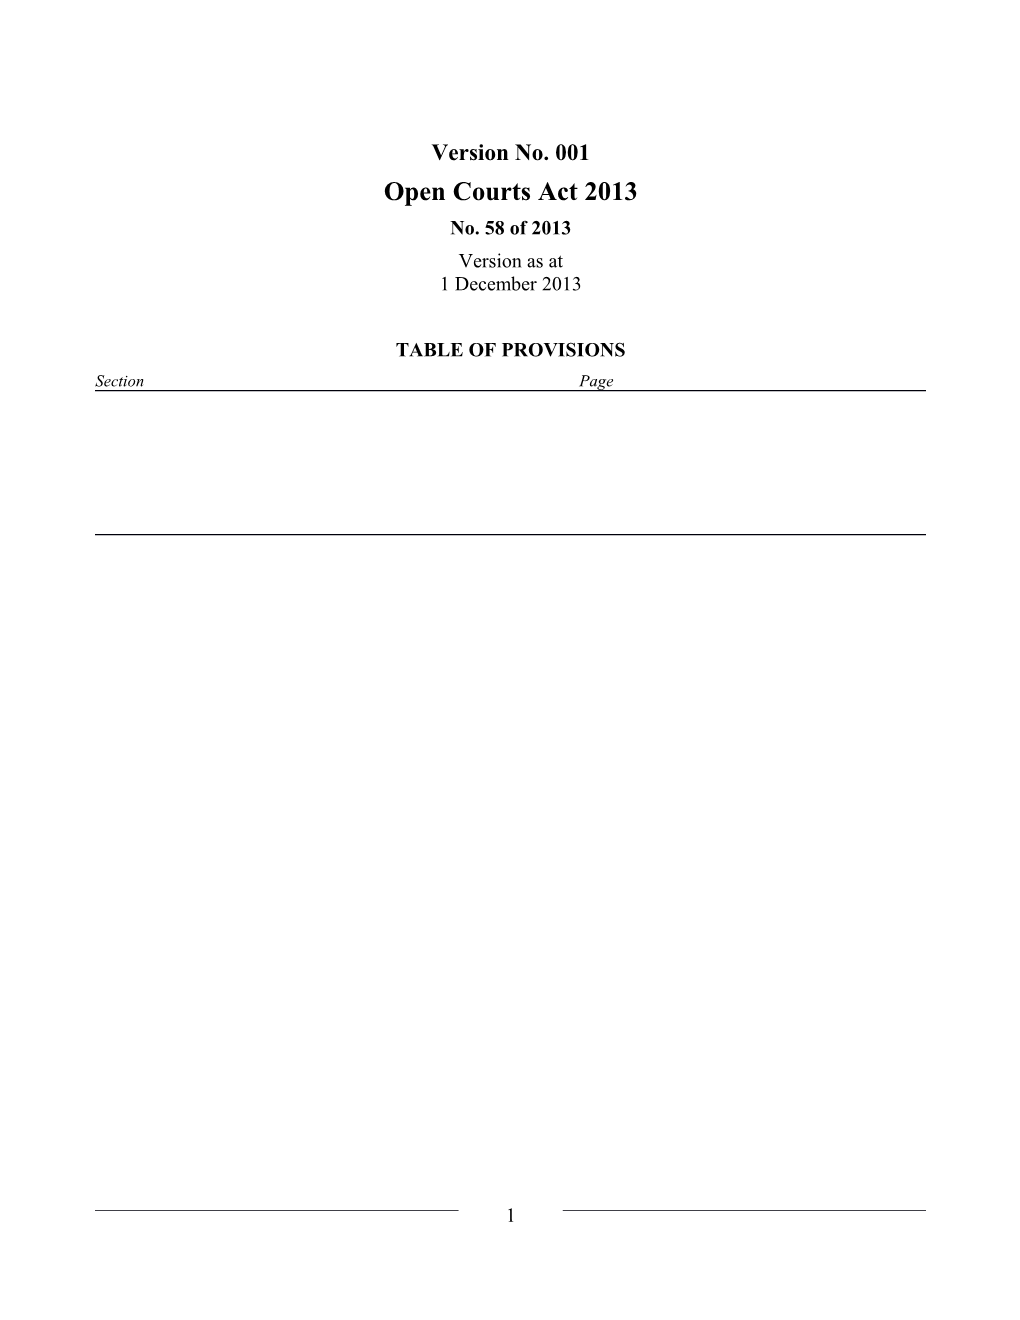 Open Courts Act 2013